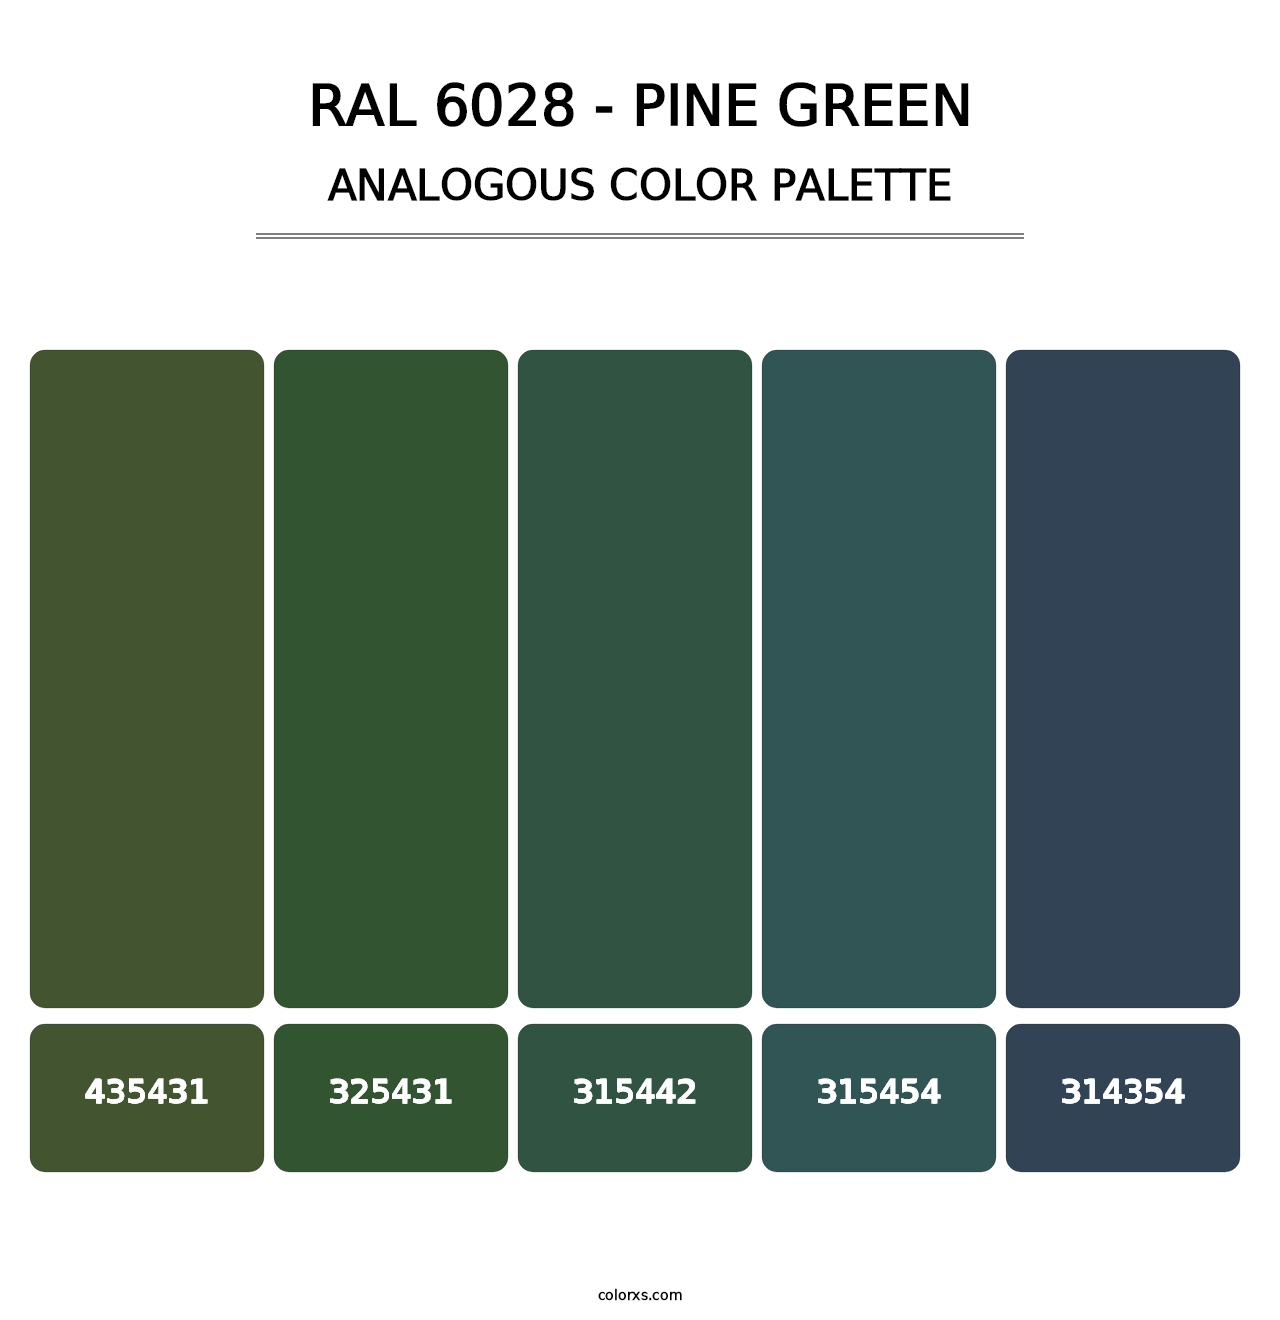 RAL 6028 - Pine Green - Analogous Color Palette